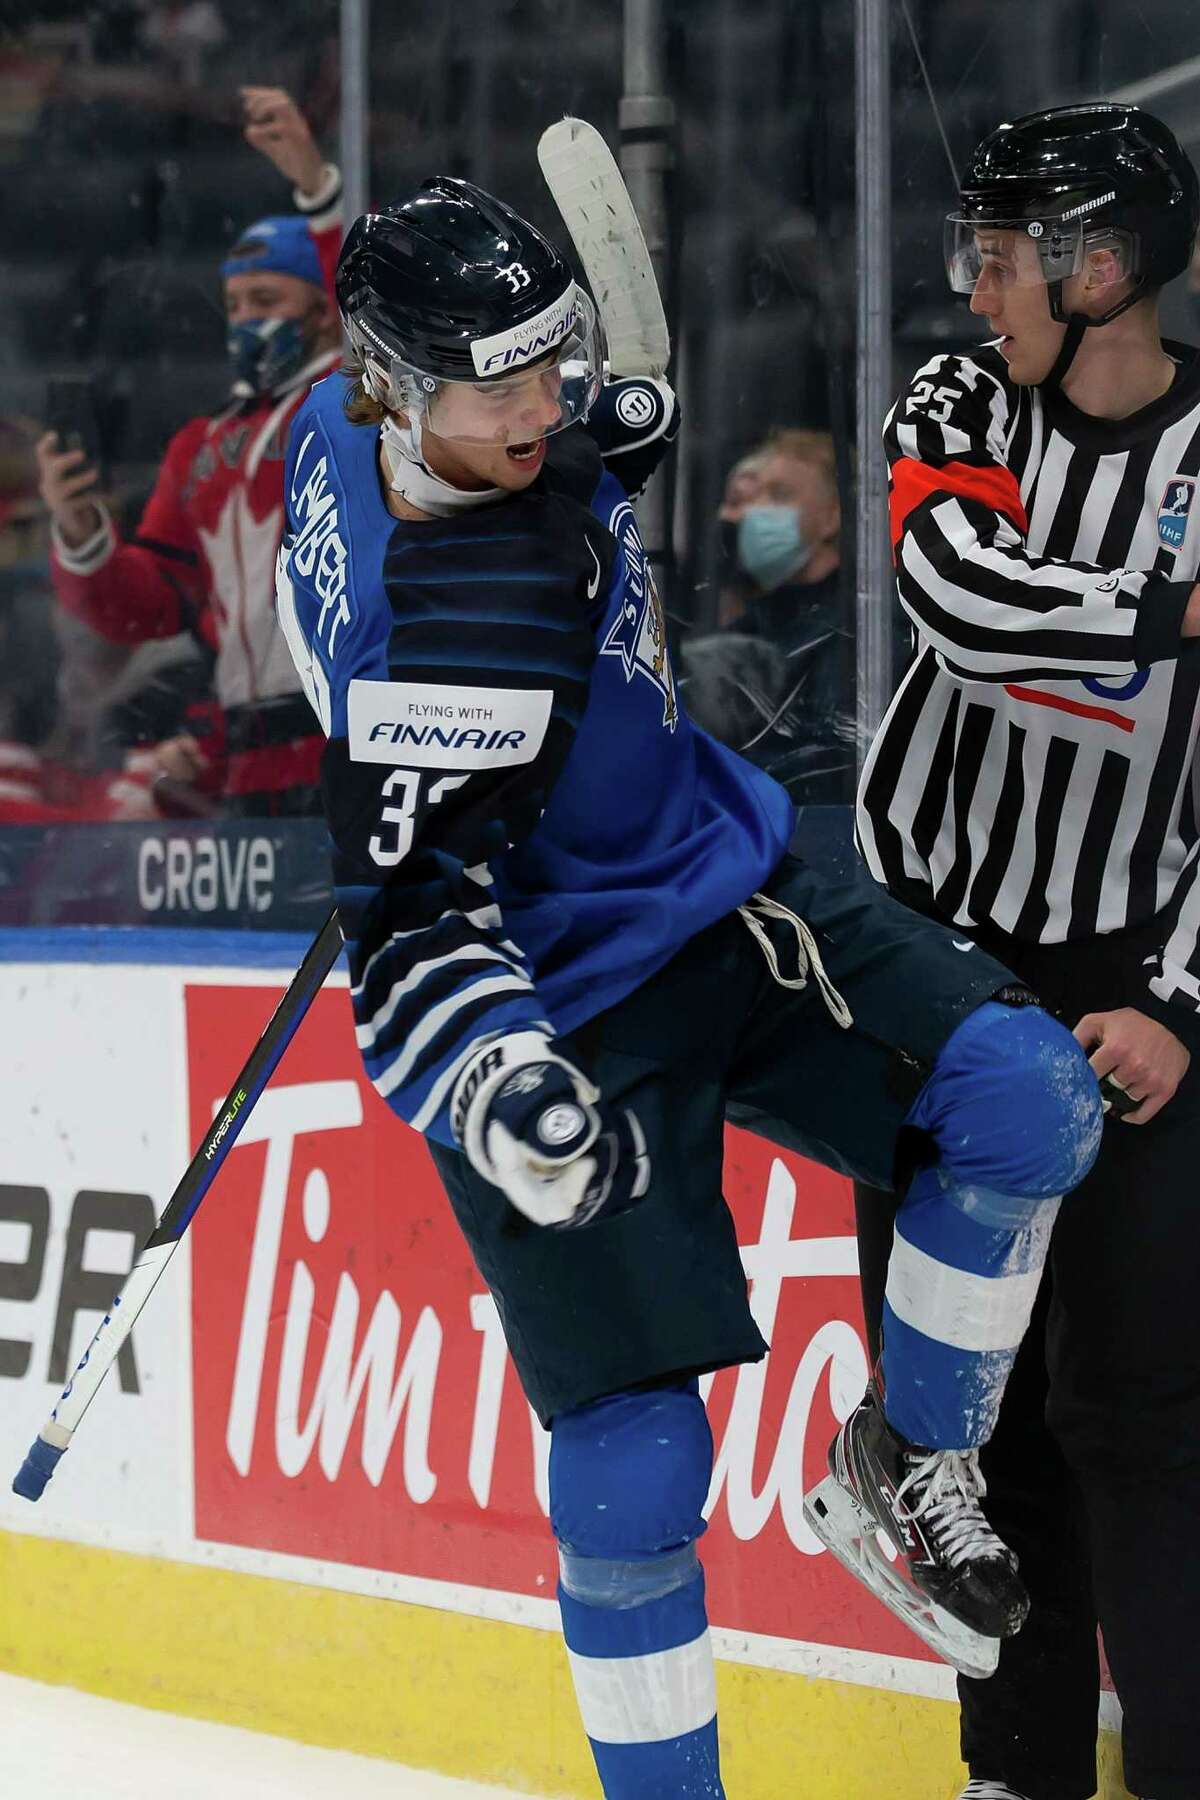 EDMONTON, AB - DECEMBER 26: Brad Lambert #33 of Finland celebrates a goal against Austria in the third period during the 2022 IIHF World Junior Championship at Rogers Place on December 27, 2021 in Edmonton, Canada. (Photo by Codie McLachlan/Getty Images)